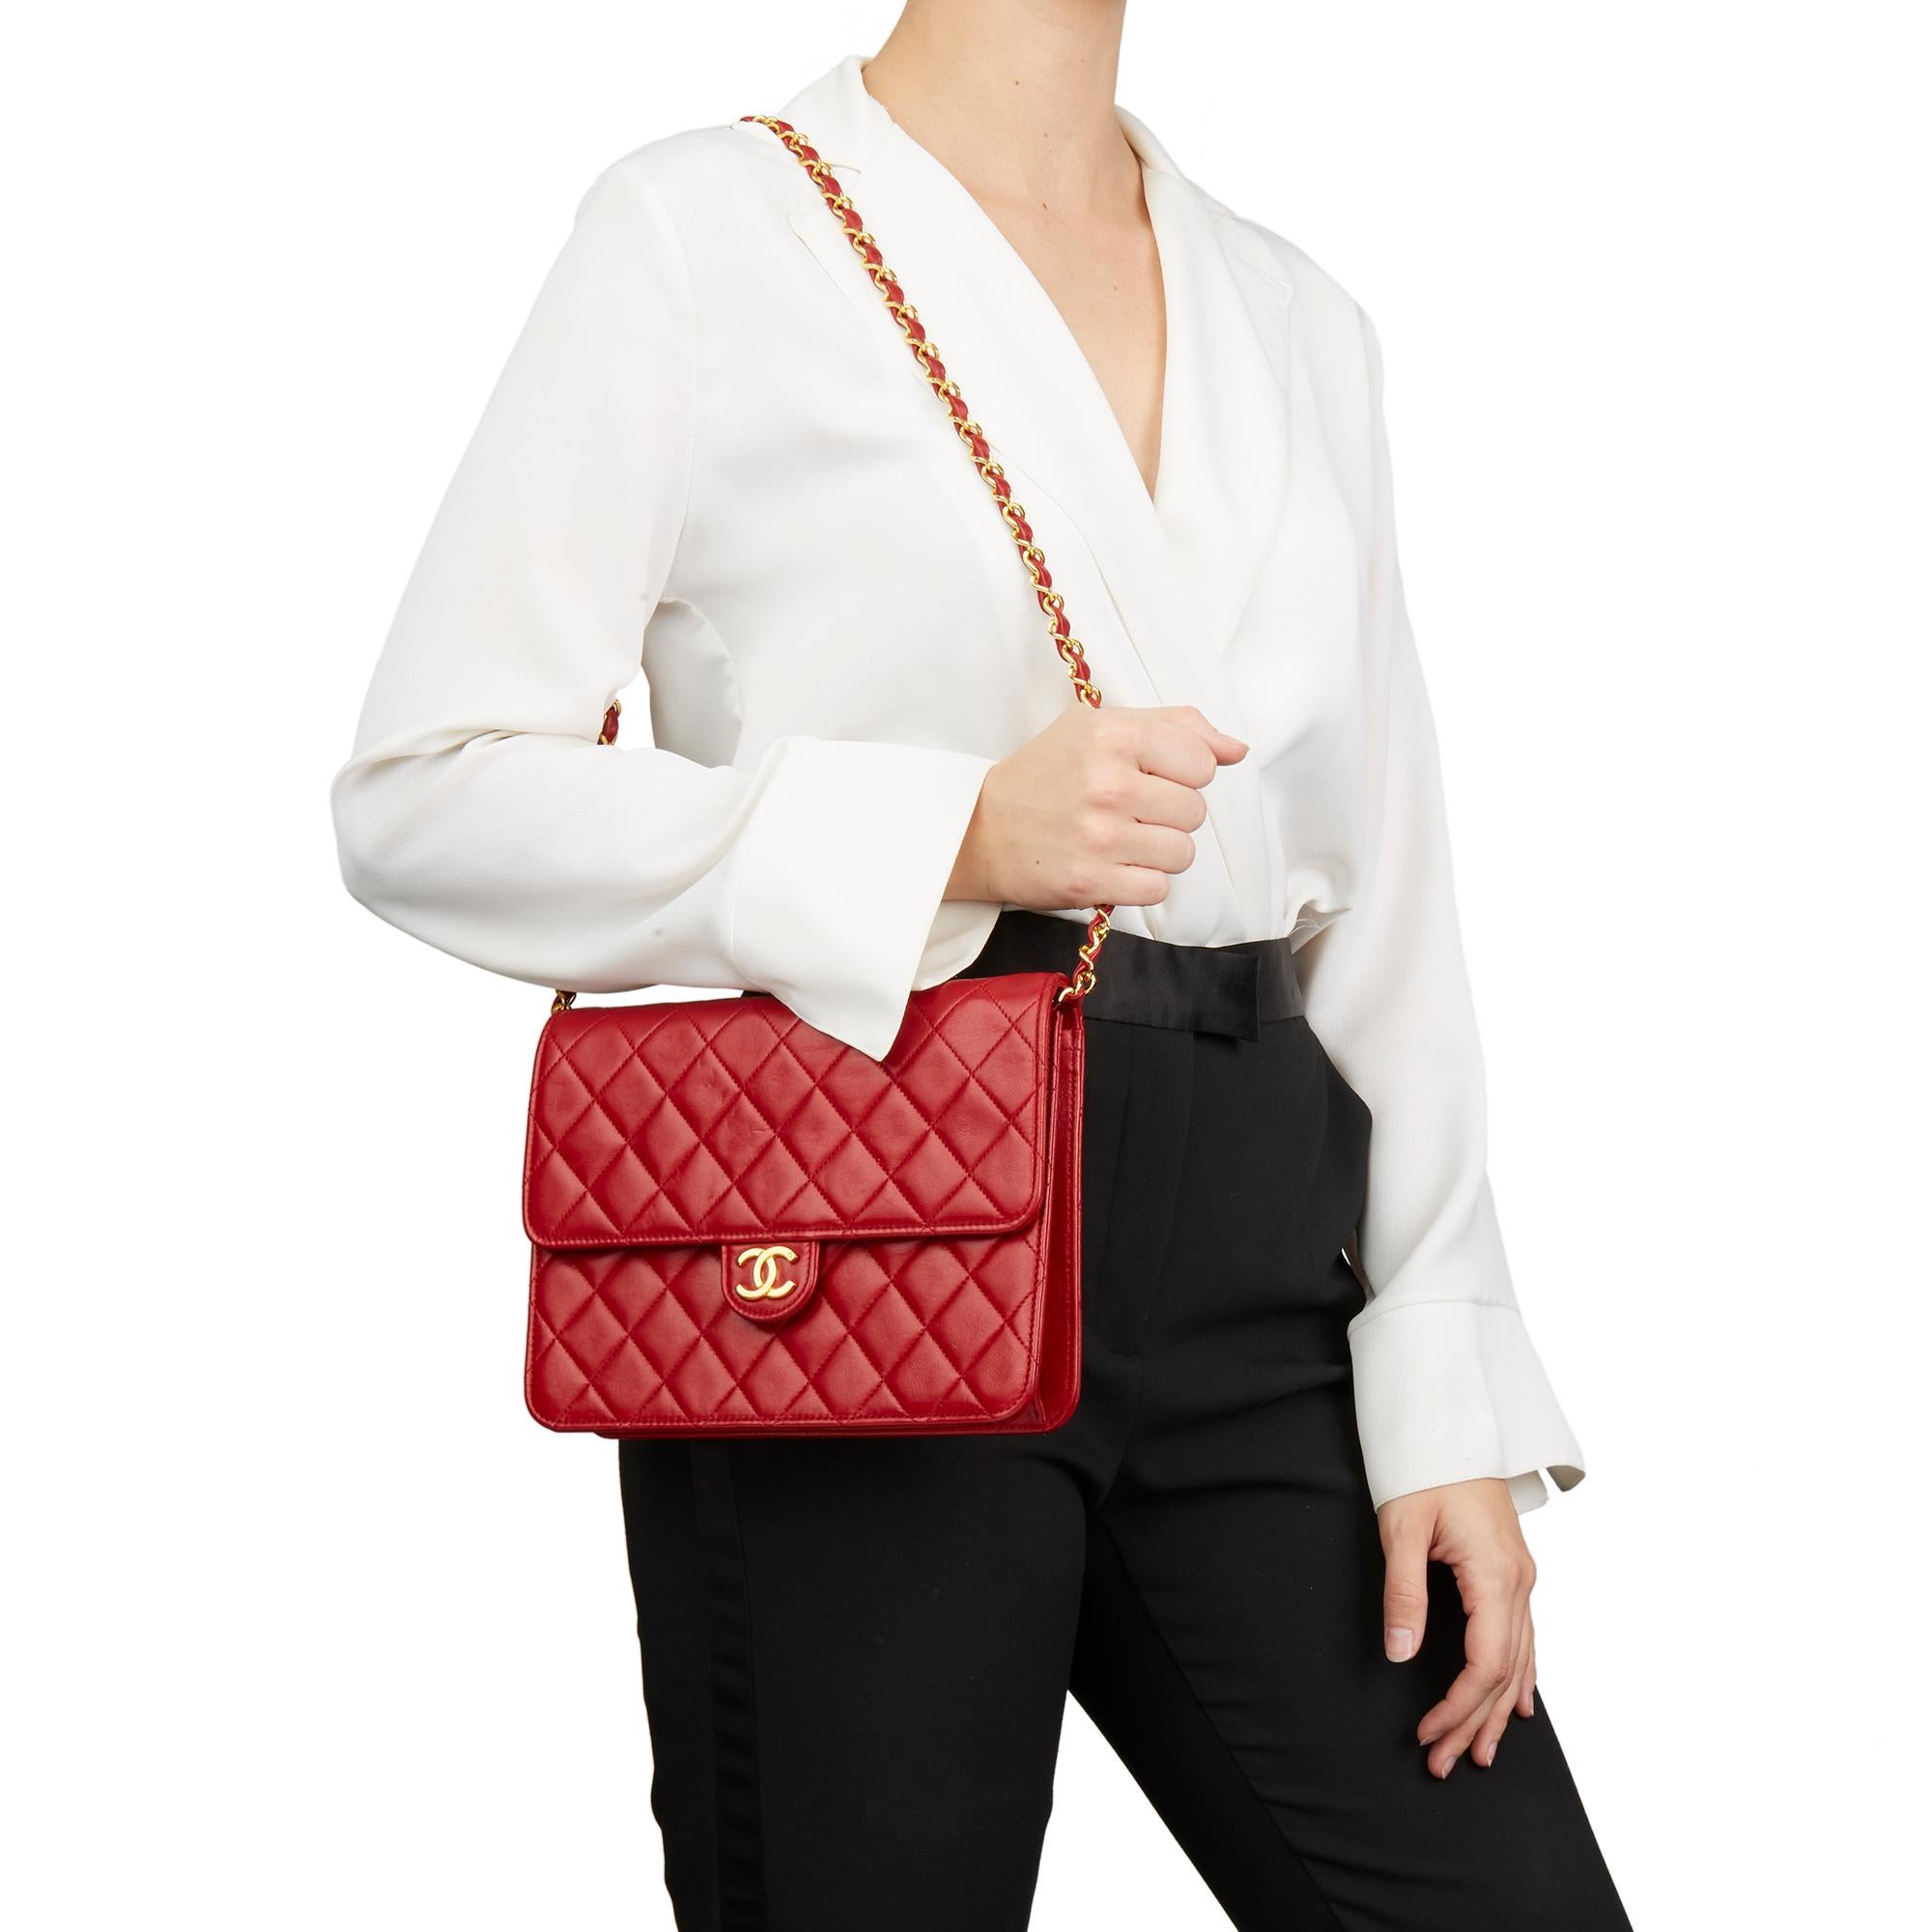 CHANEL
Red Quilted Lambskin Vintage Small Classic Single Flap Bag

Xupes Reference: HB2786
Serial Number: Serial Sticker no longer present
Age (Circa): 1990
Authenticity Details: (Made in France)
Gender: Ladies
Type: Shoulder

Colour: Red
Hardware: